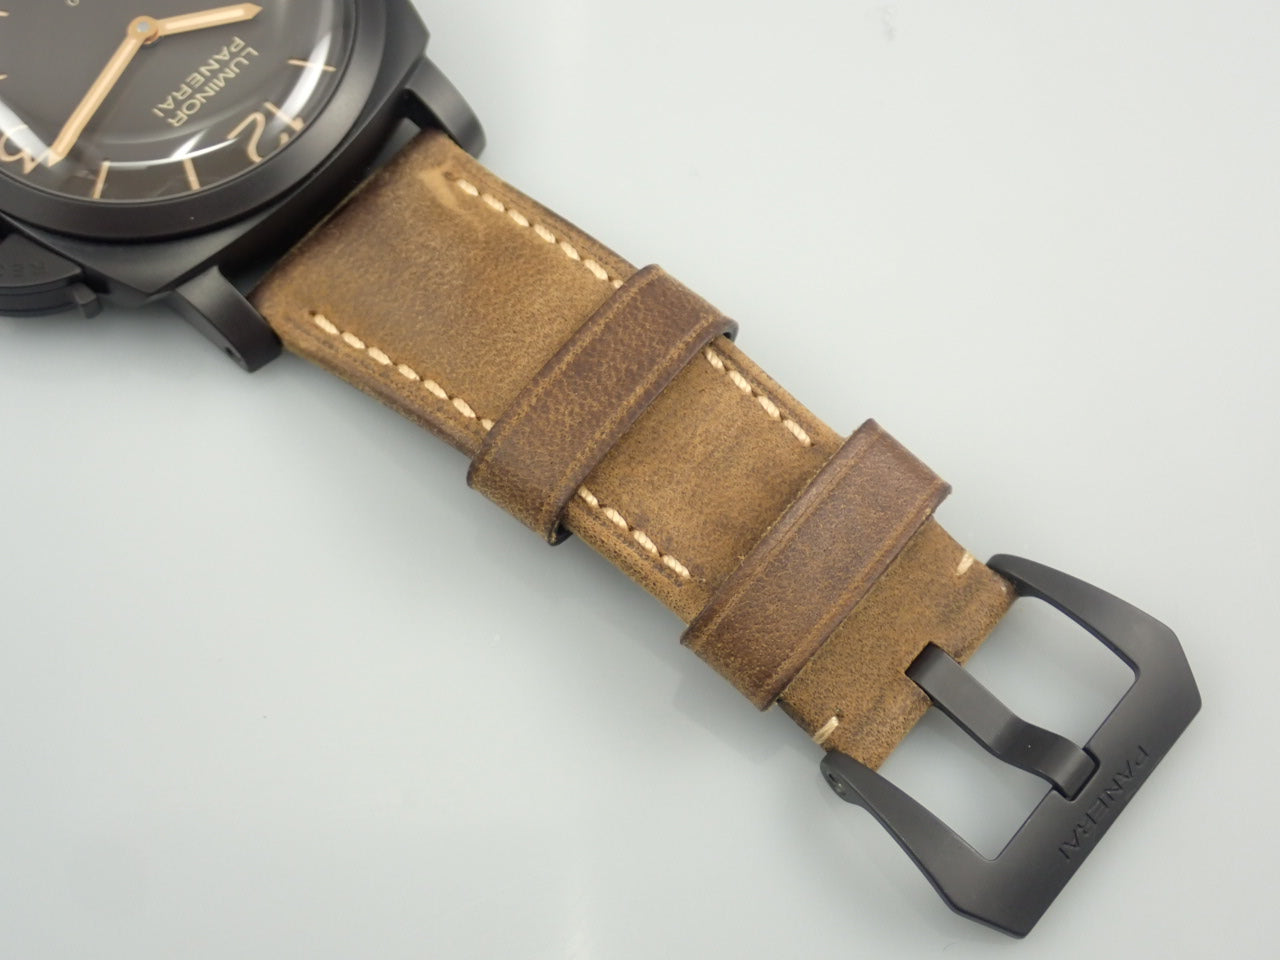 Panerai Luminor Composite 1950 3 Days &lt;Warranty Box and Others&gt;